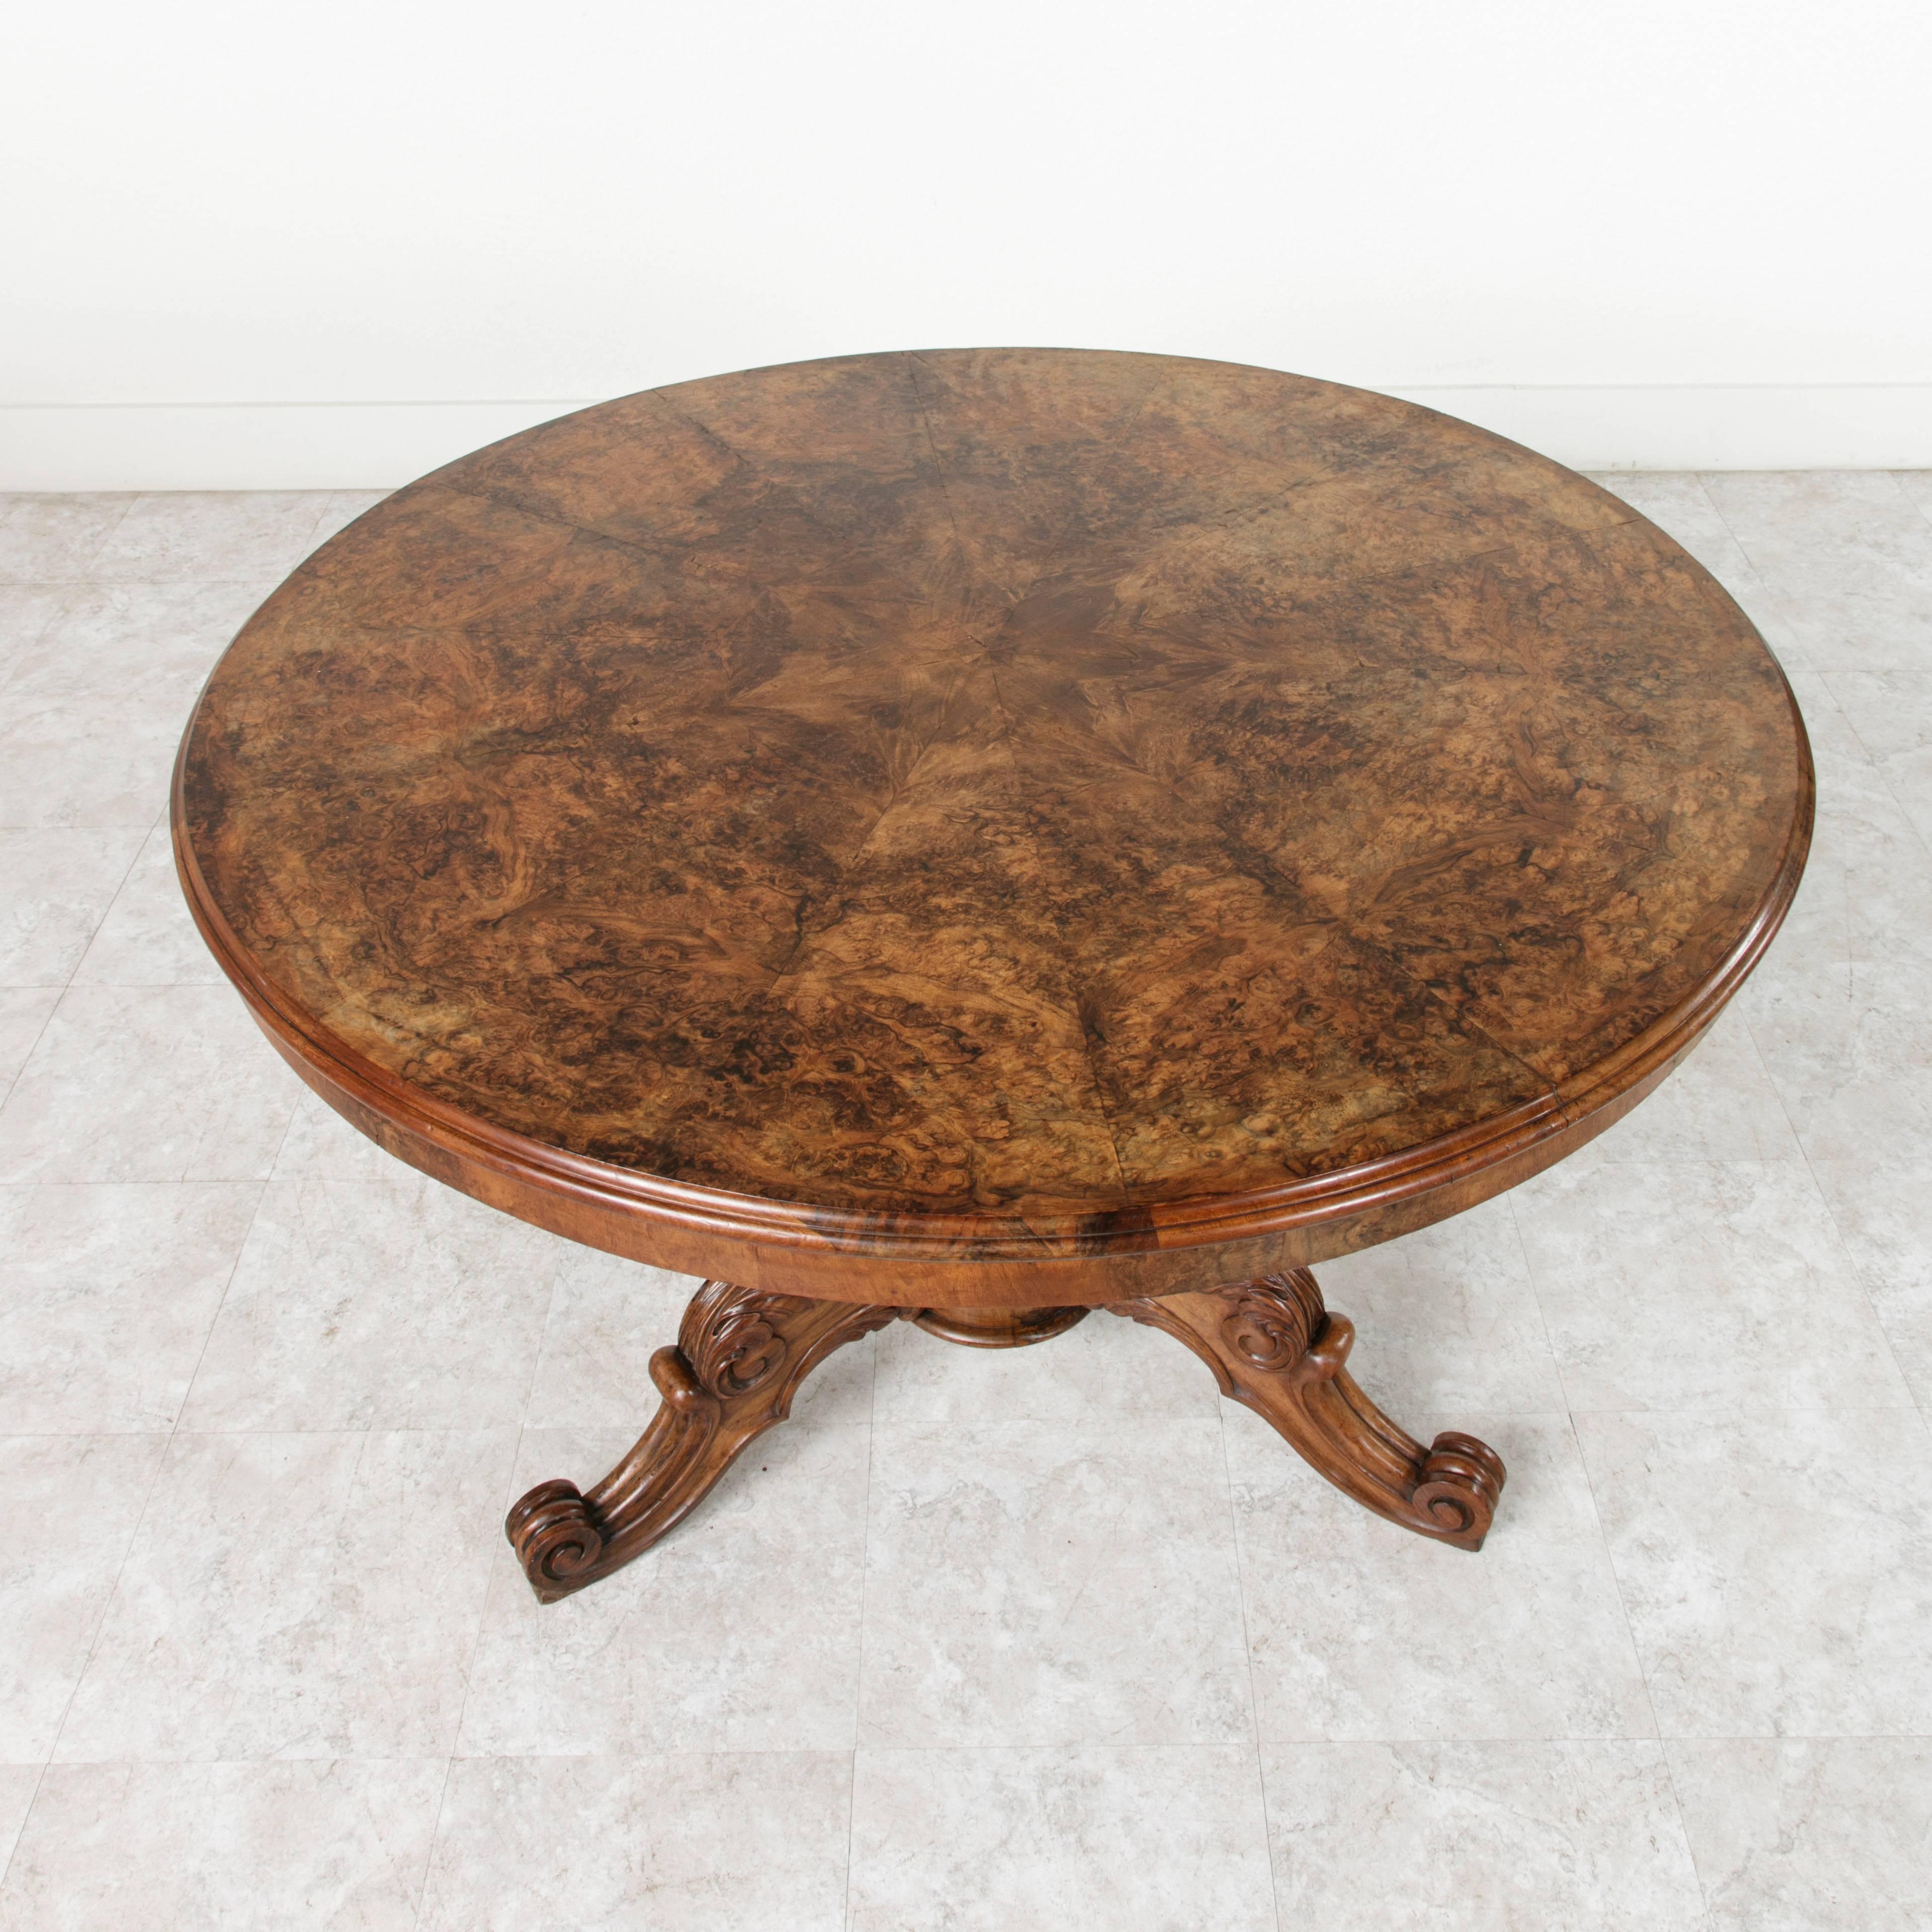 Mid-19th Century Rare French Restauration Period Tilt-Top Pedestal Center Table of Burled Walnut